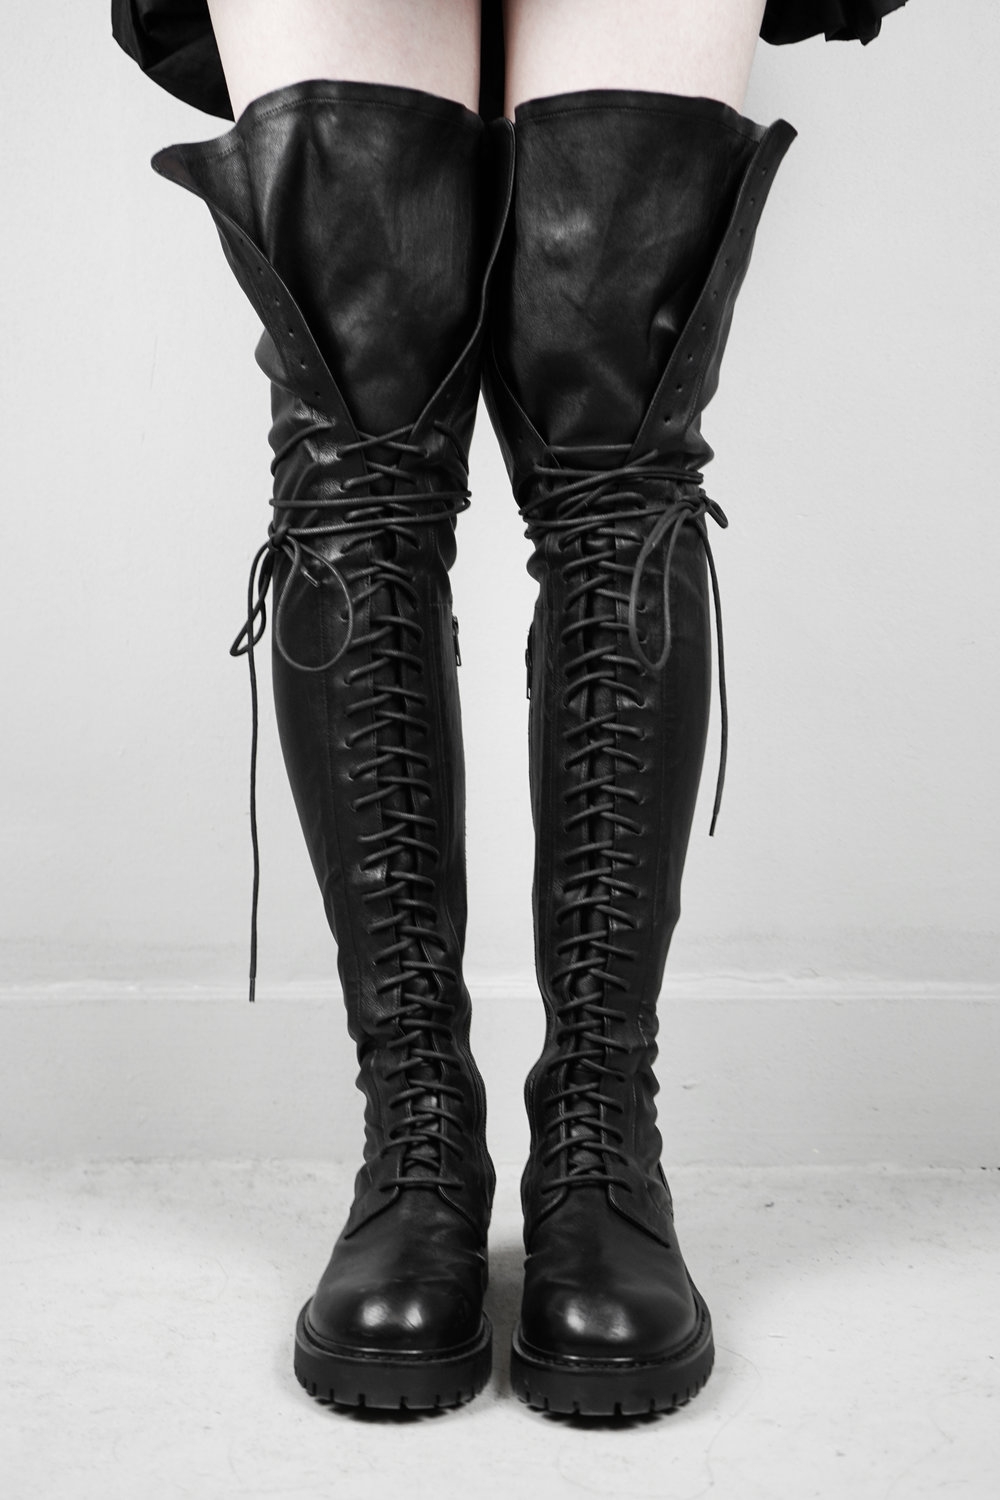 Ann Demeulemeester – Womens – Knee Length Boots – Black – Leather – Lace Up – Round Toe – Low Heel